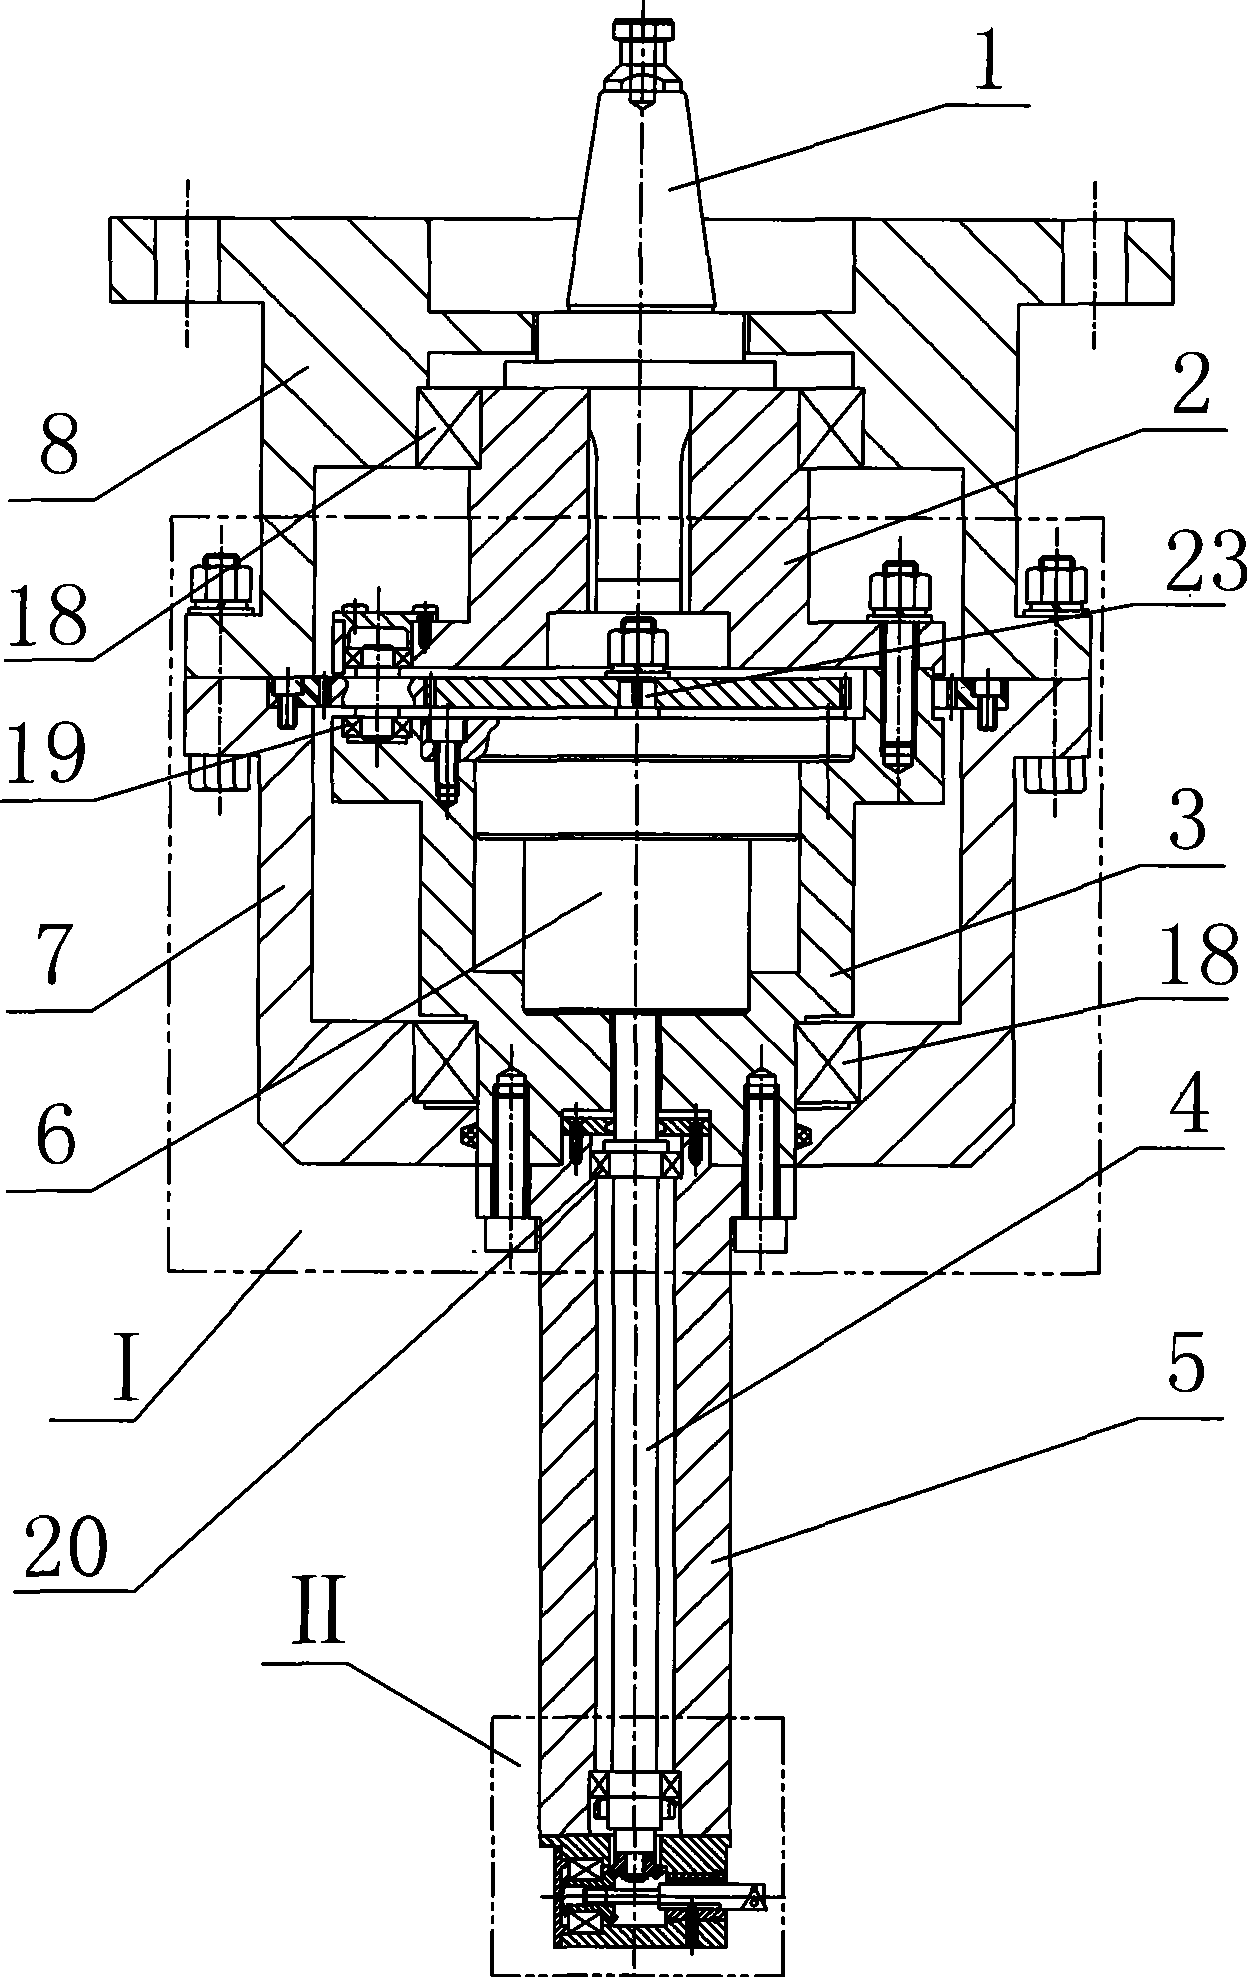 Numerically controlled machine taper-hole boring device and method